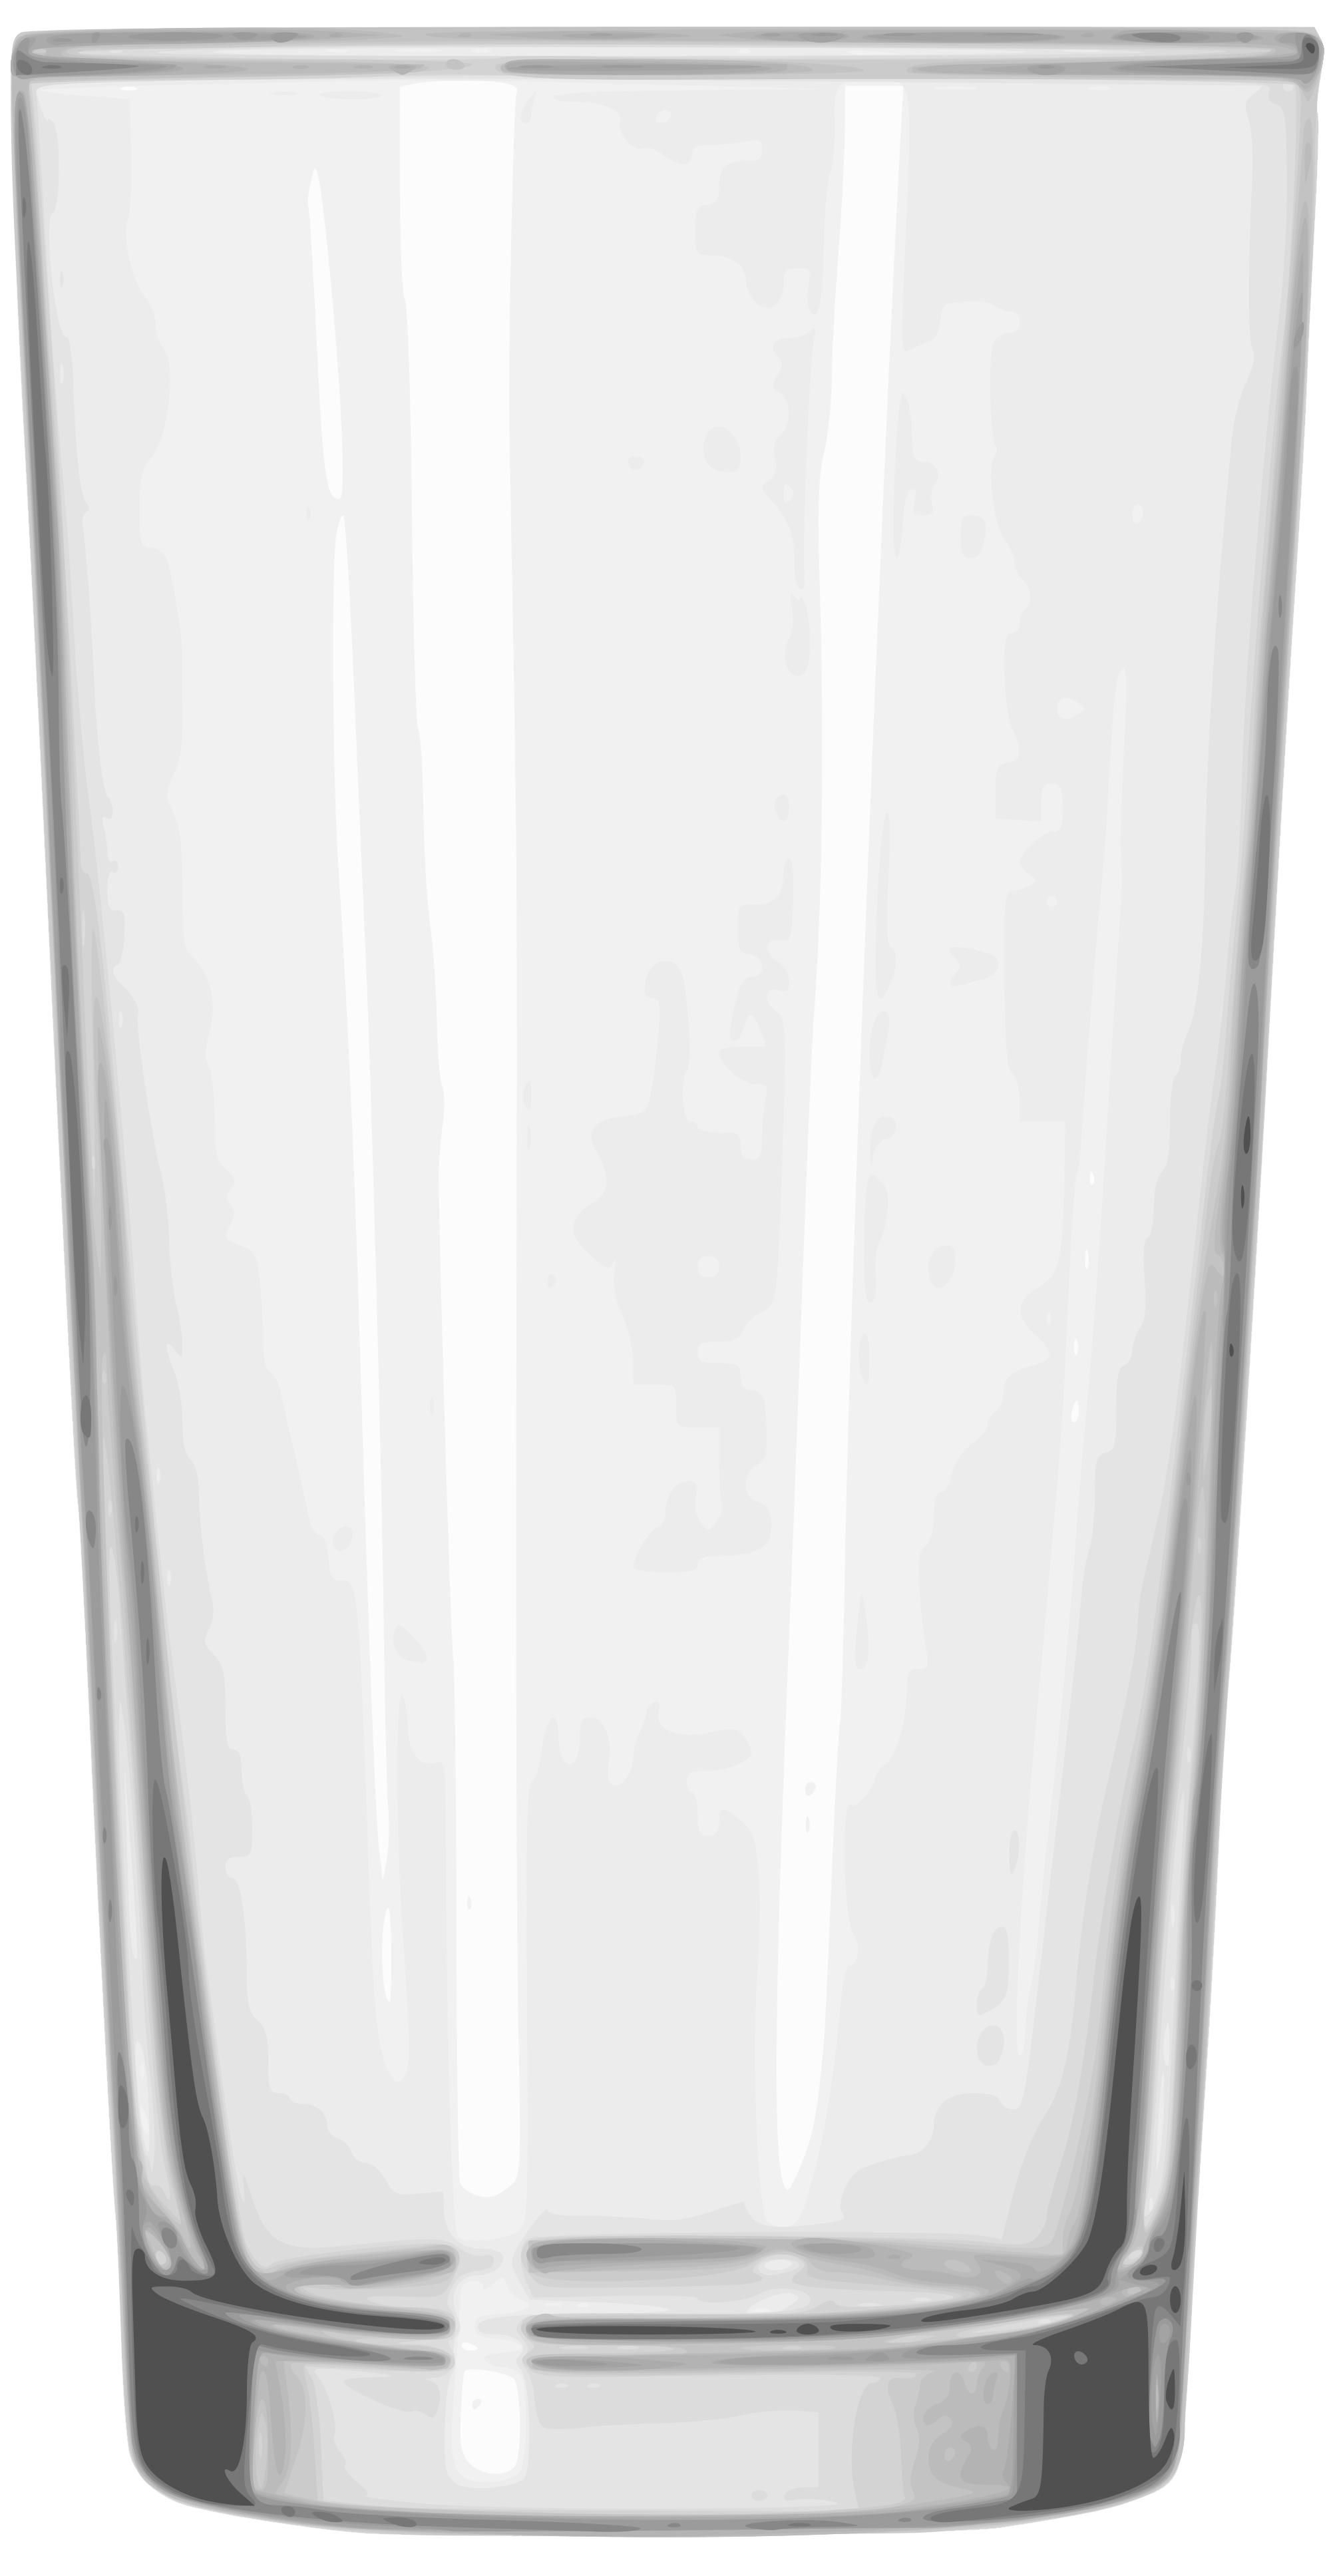 Wine Glass Png image #31794